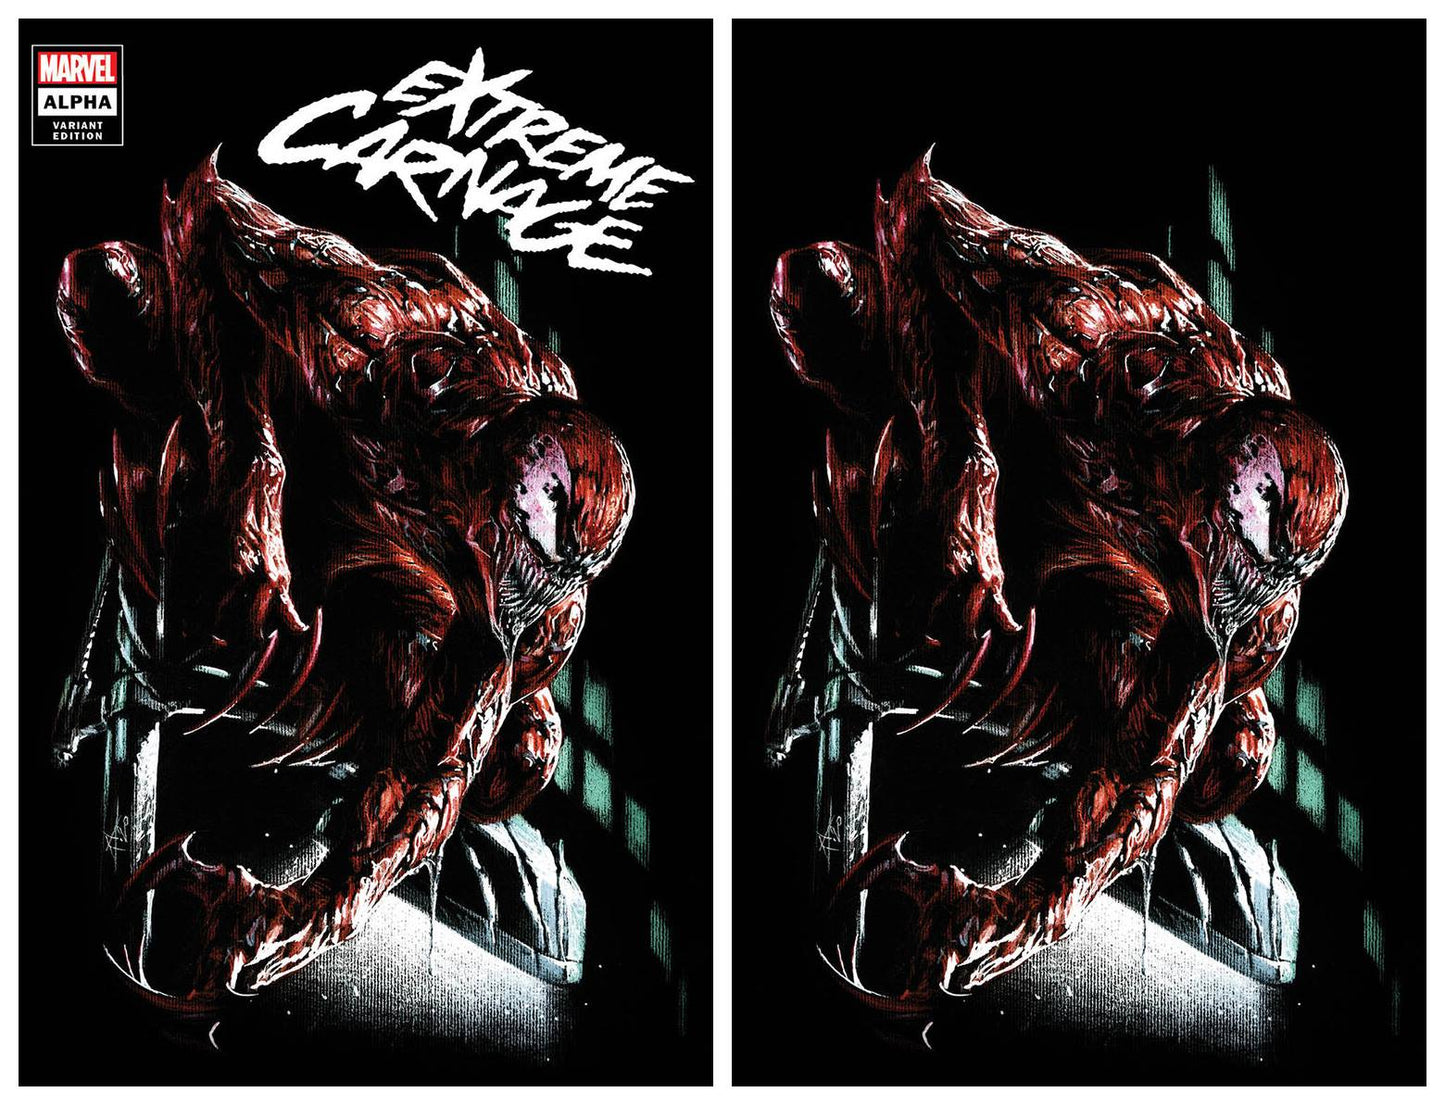 EXTREME CARNAGE ALPHA #1 GABRIELLE DELL'OTTO TRADE/VIRGIN VARIANT SET LIMITED TO 600 SETS WITH COA